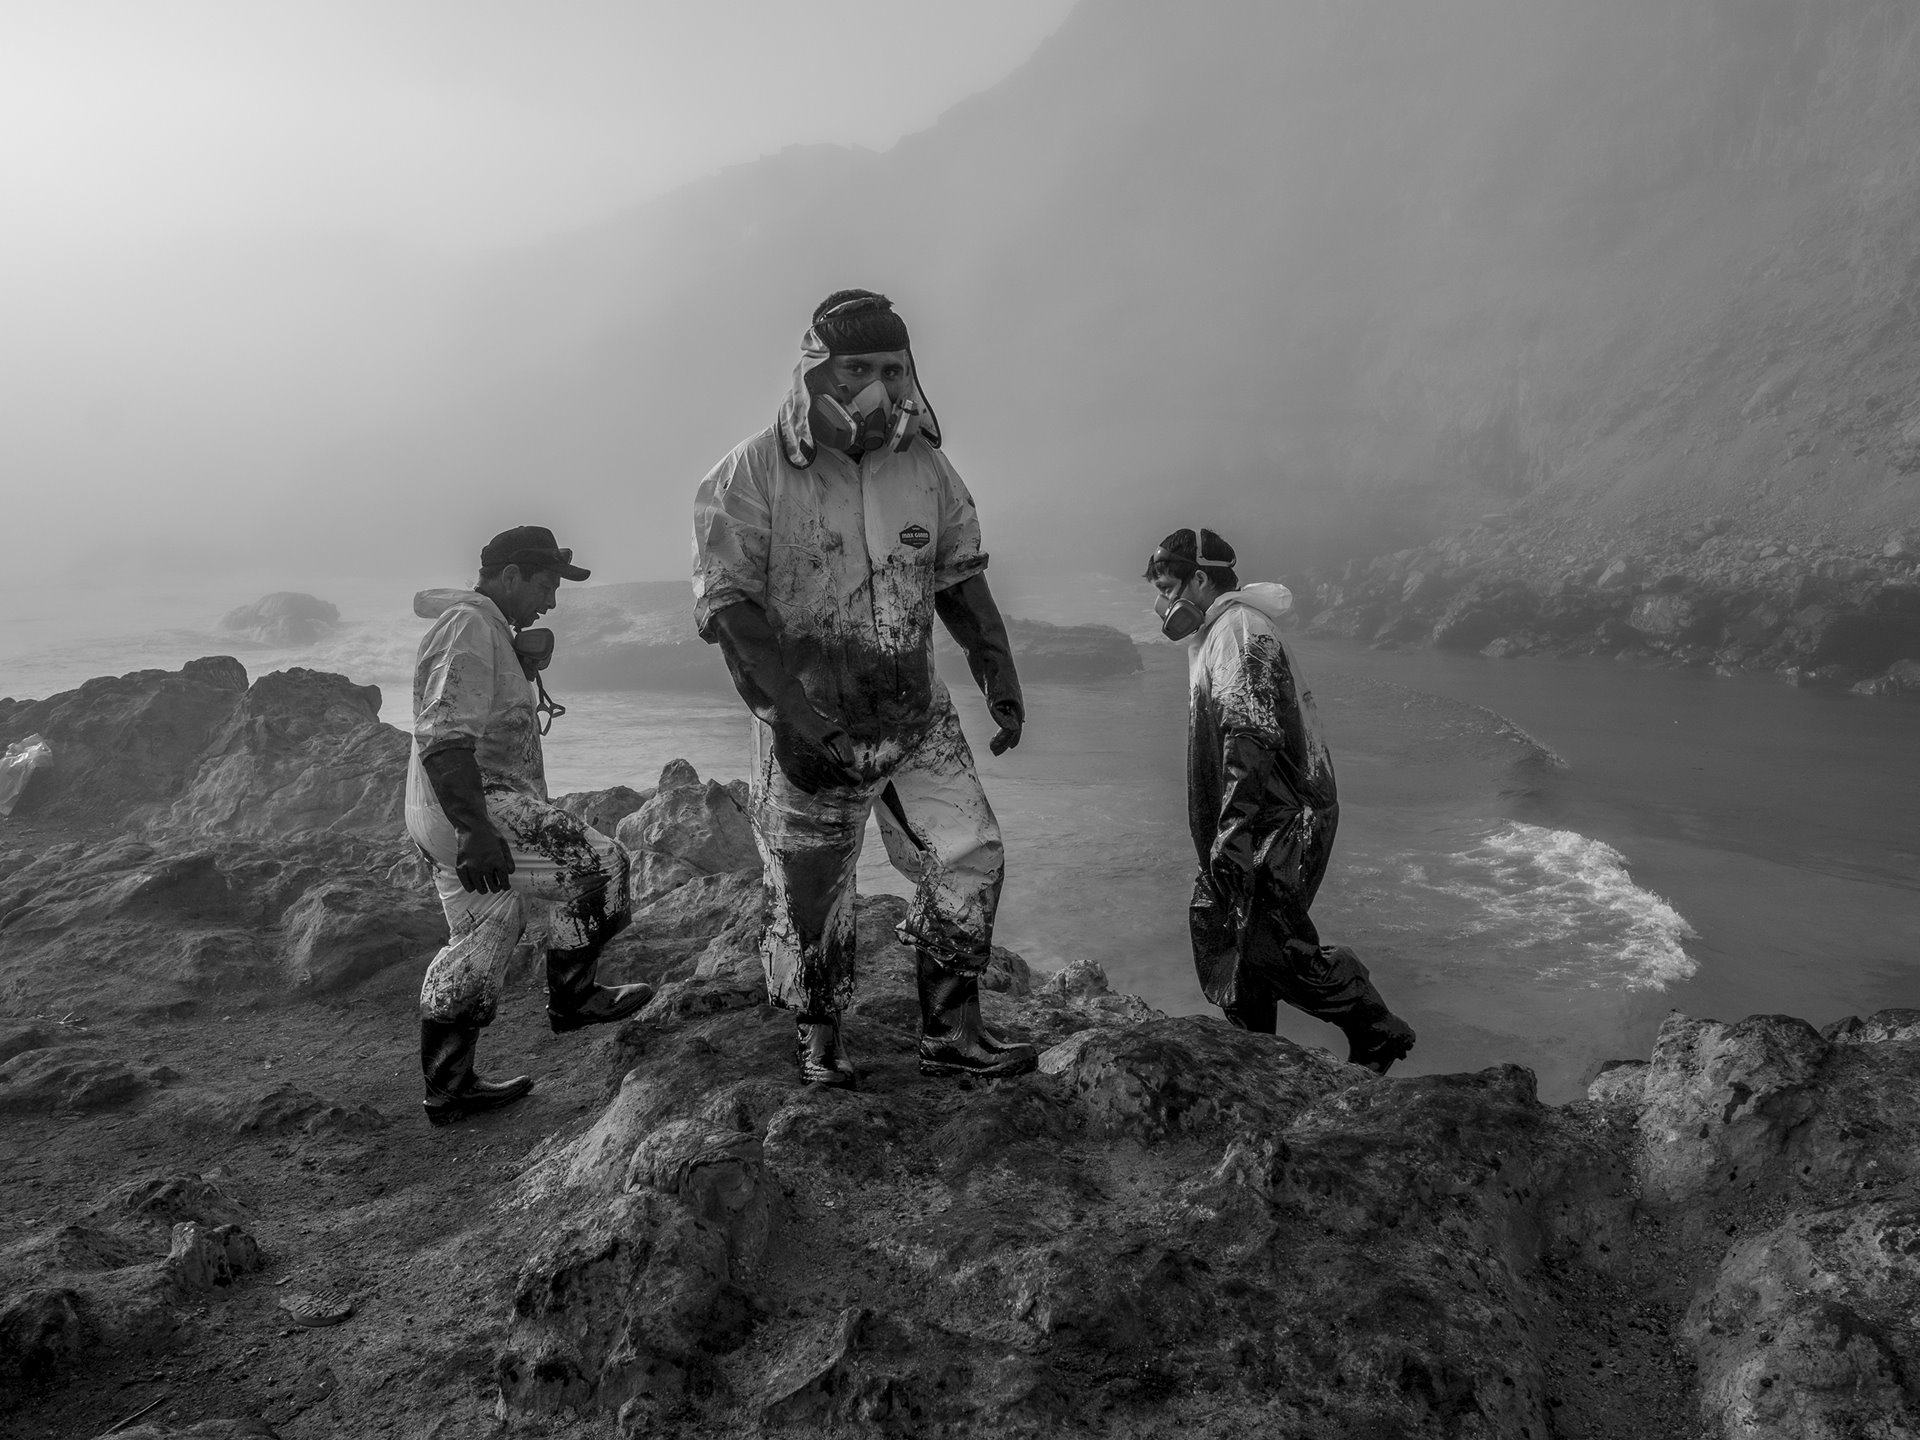 <p>Workers at Playa Cavero, Peru, deal with the environmental disaster caused by an oil spill at Spanish transnational oil company Repsol&rsquo;s La Pampilla refinery nearby.</p>
